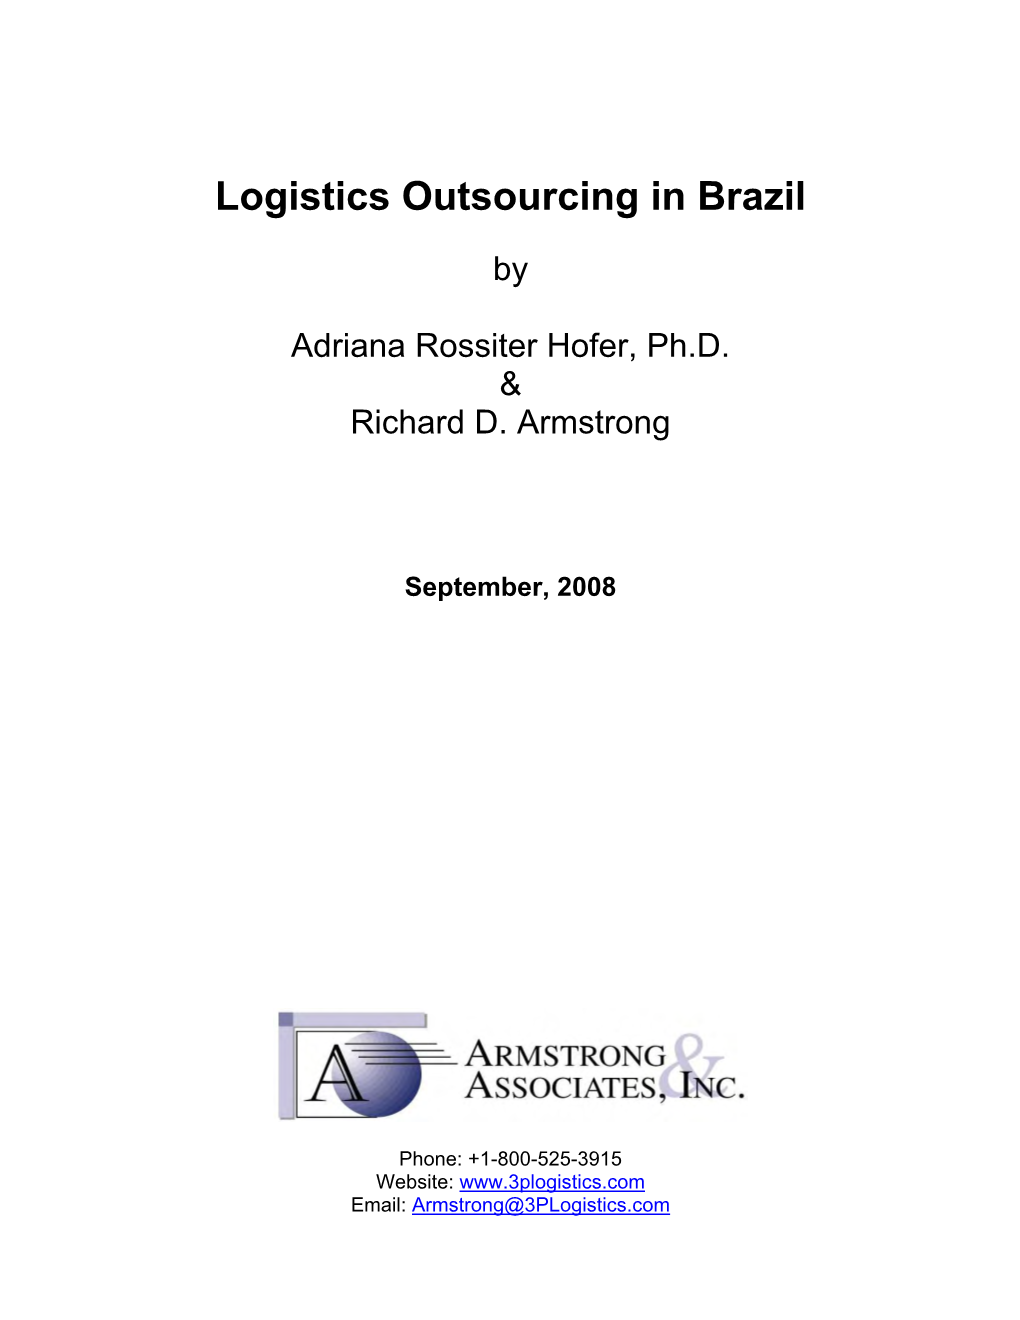 Logistics Outsourcing in Brazil